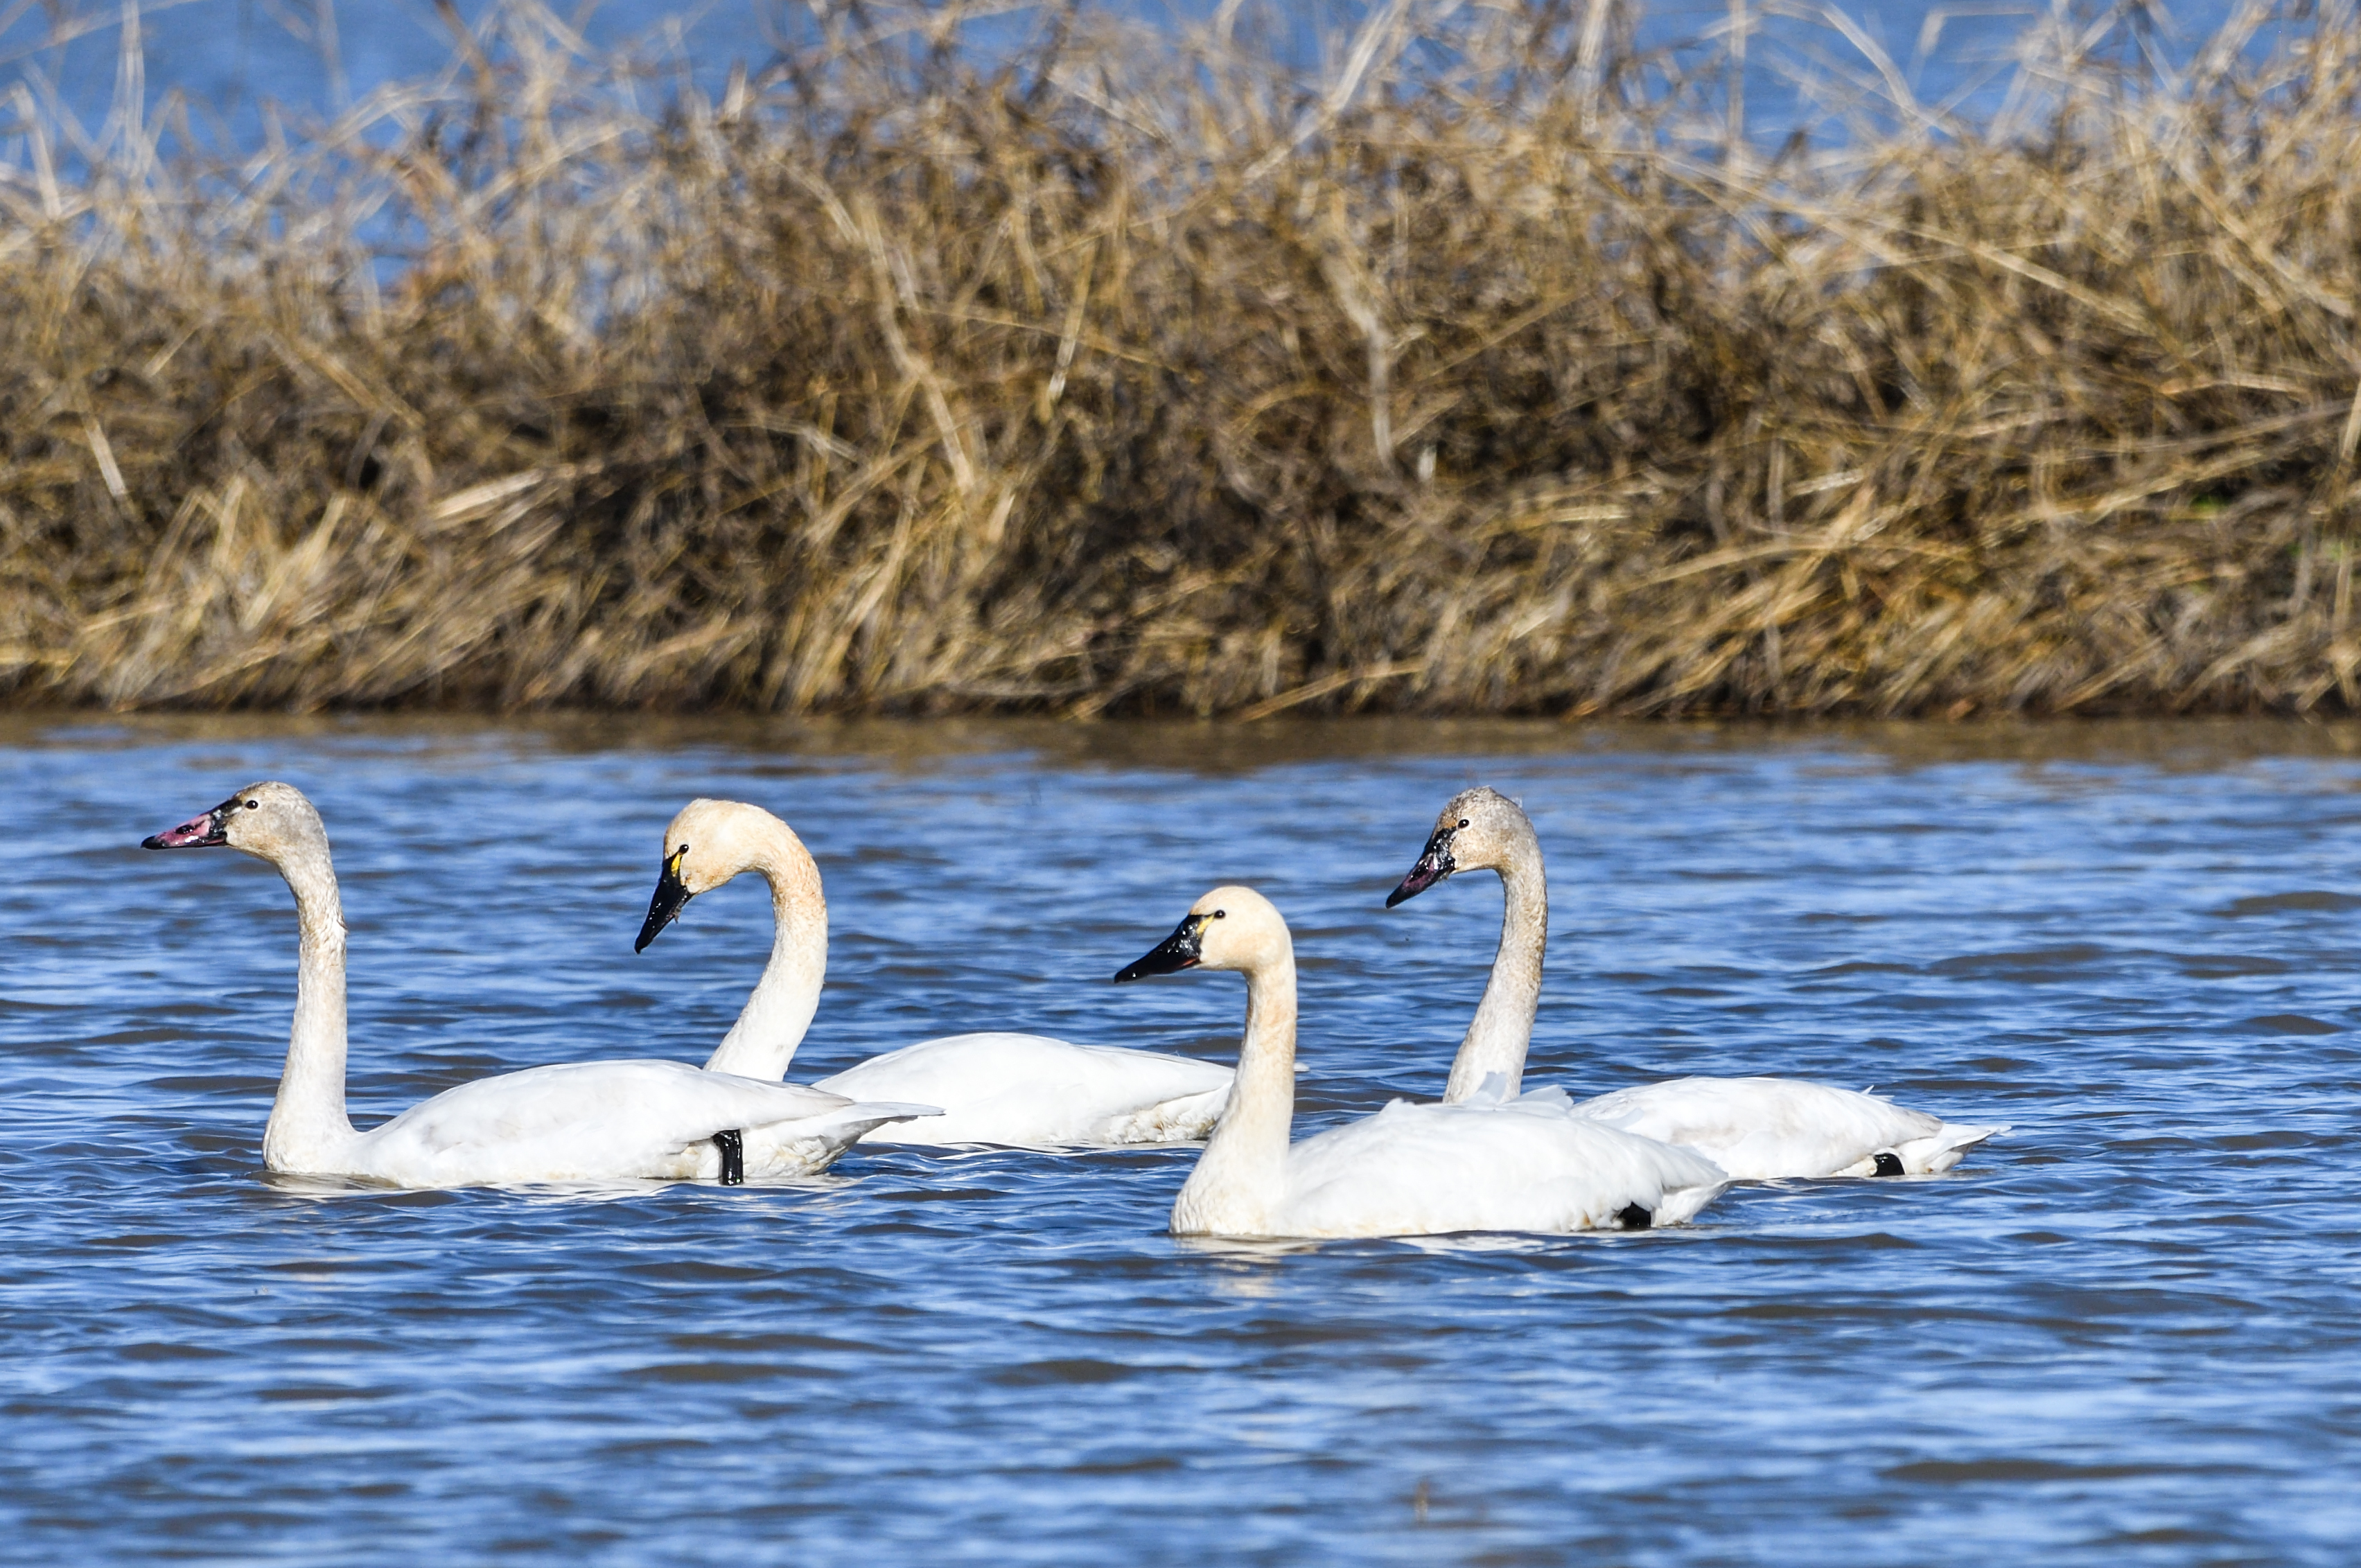 Four Tundra Swans in the flooded rice field